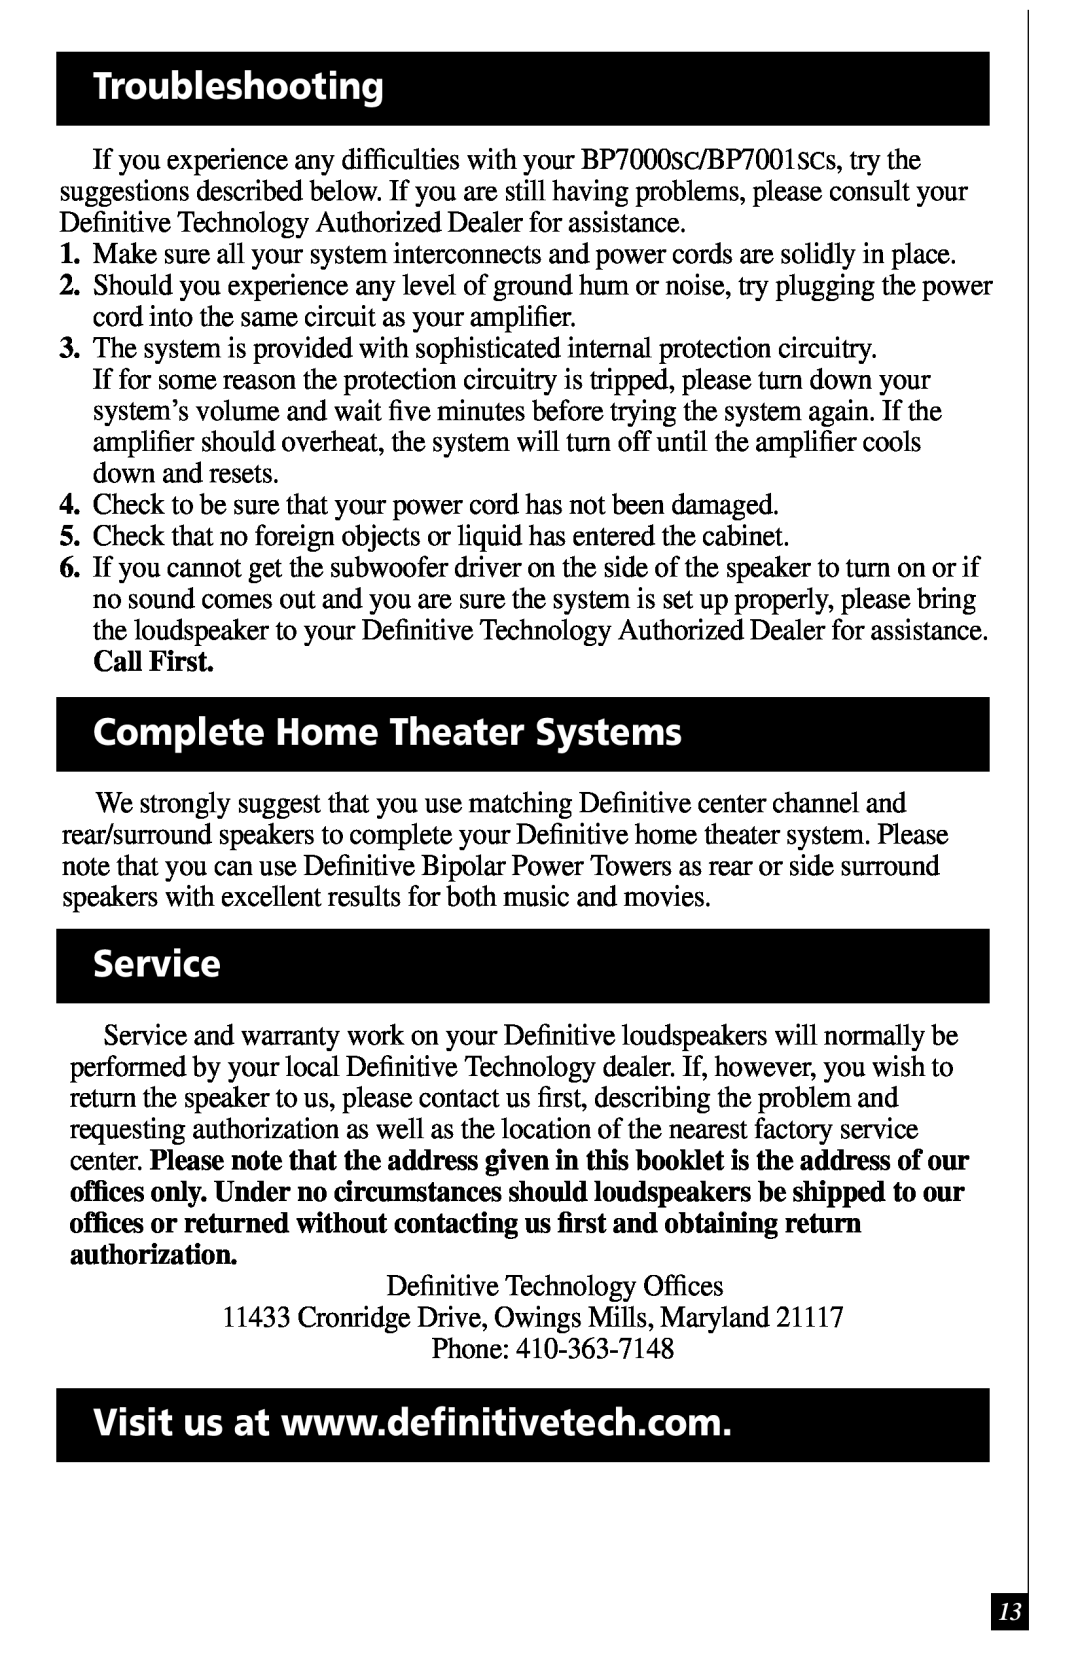 Definitive Technology BP7001SC, BP7000SC owner manual Troubleshooting, Complete Home Theater Systems, Service, Call First 